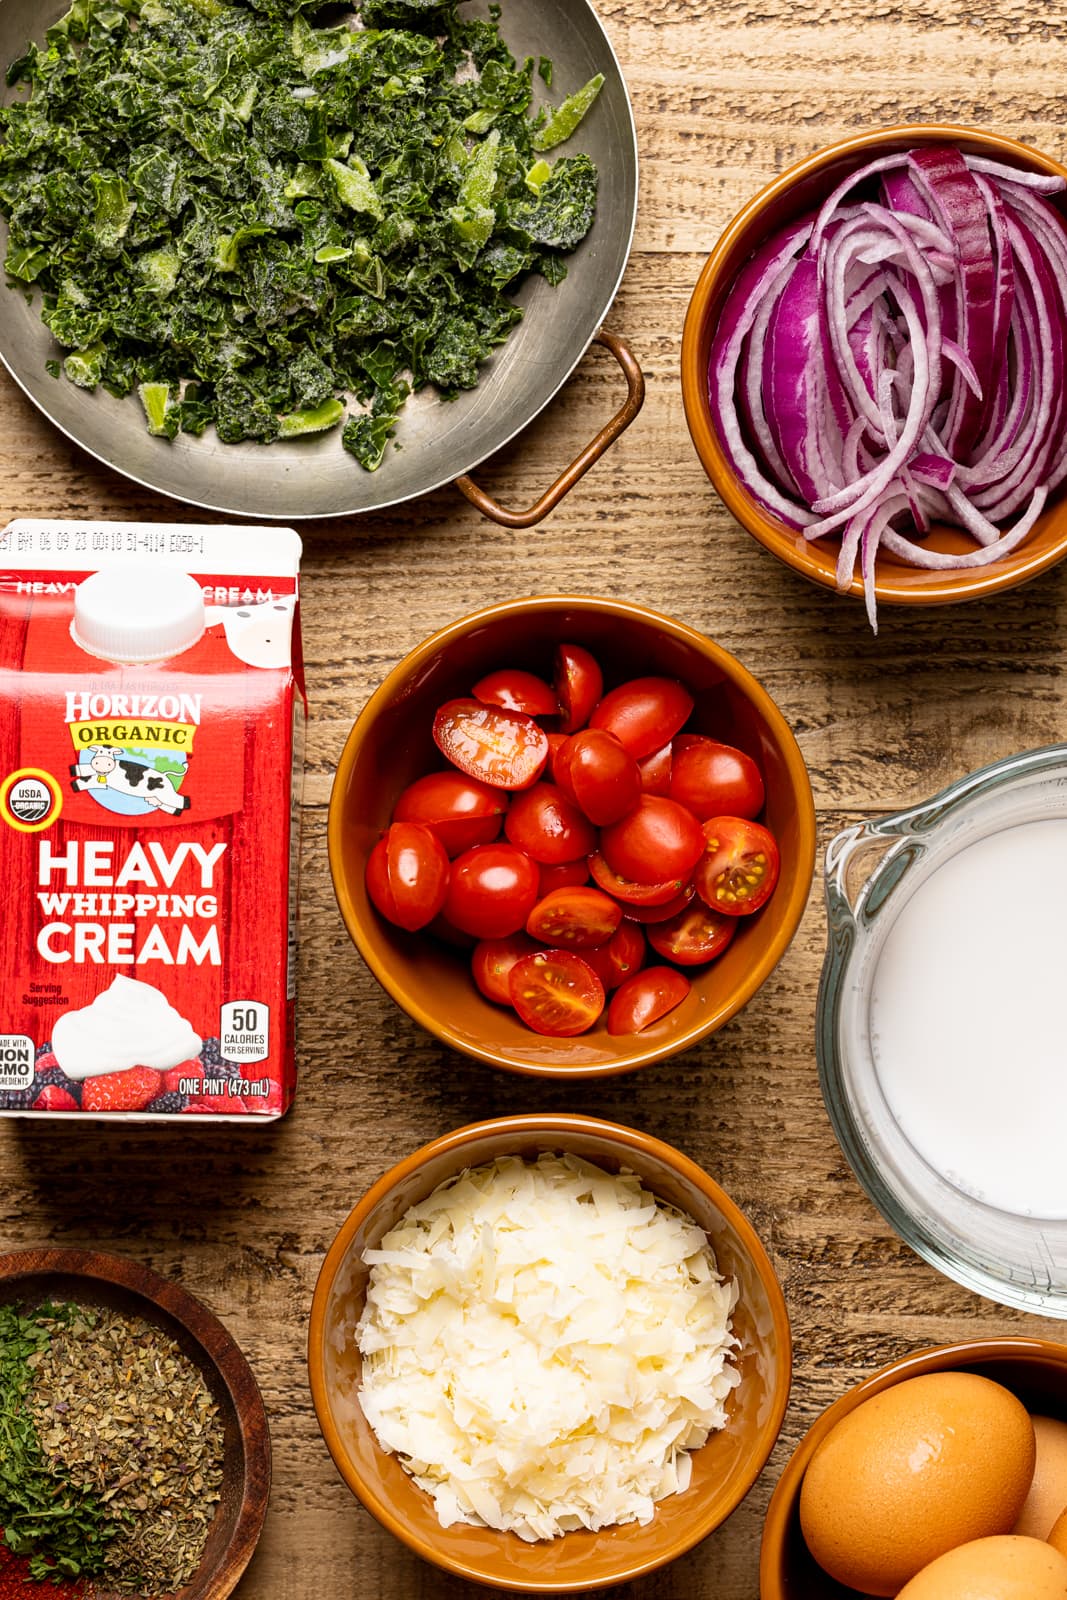 Ingredients on a brown wood table including heavy cream, tomatoes, onions, kale, milk, and grated parmesan cheese.